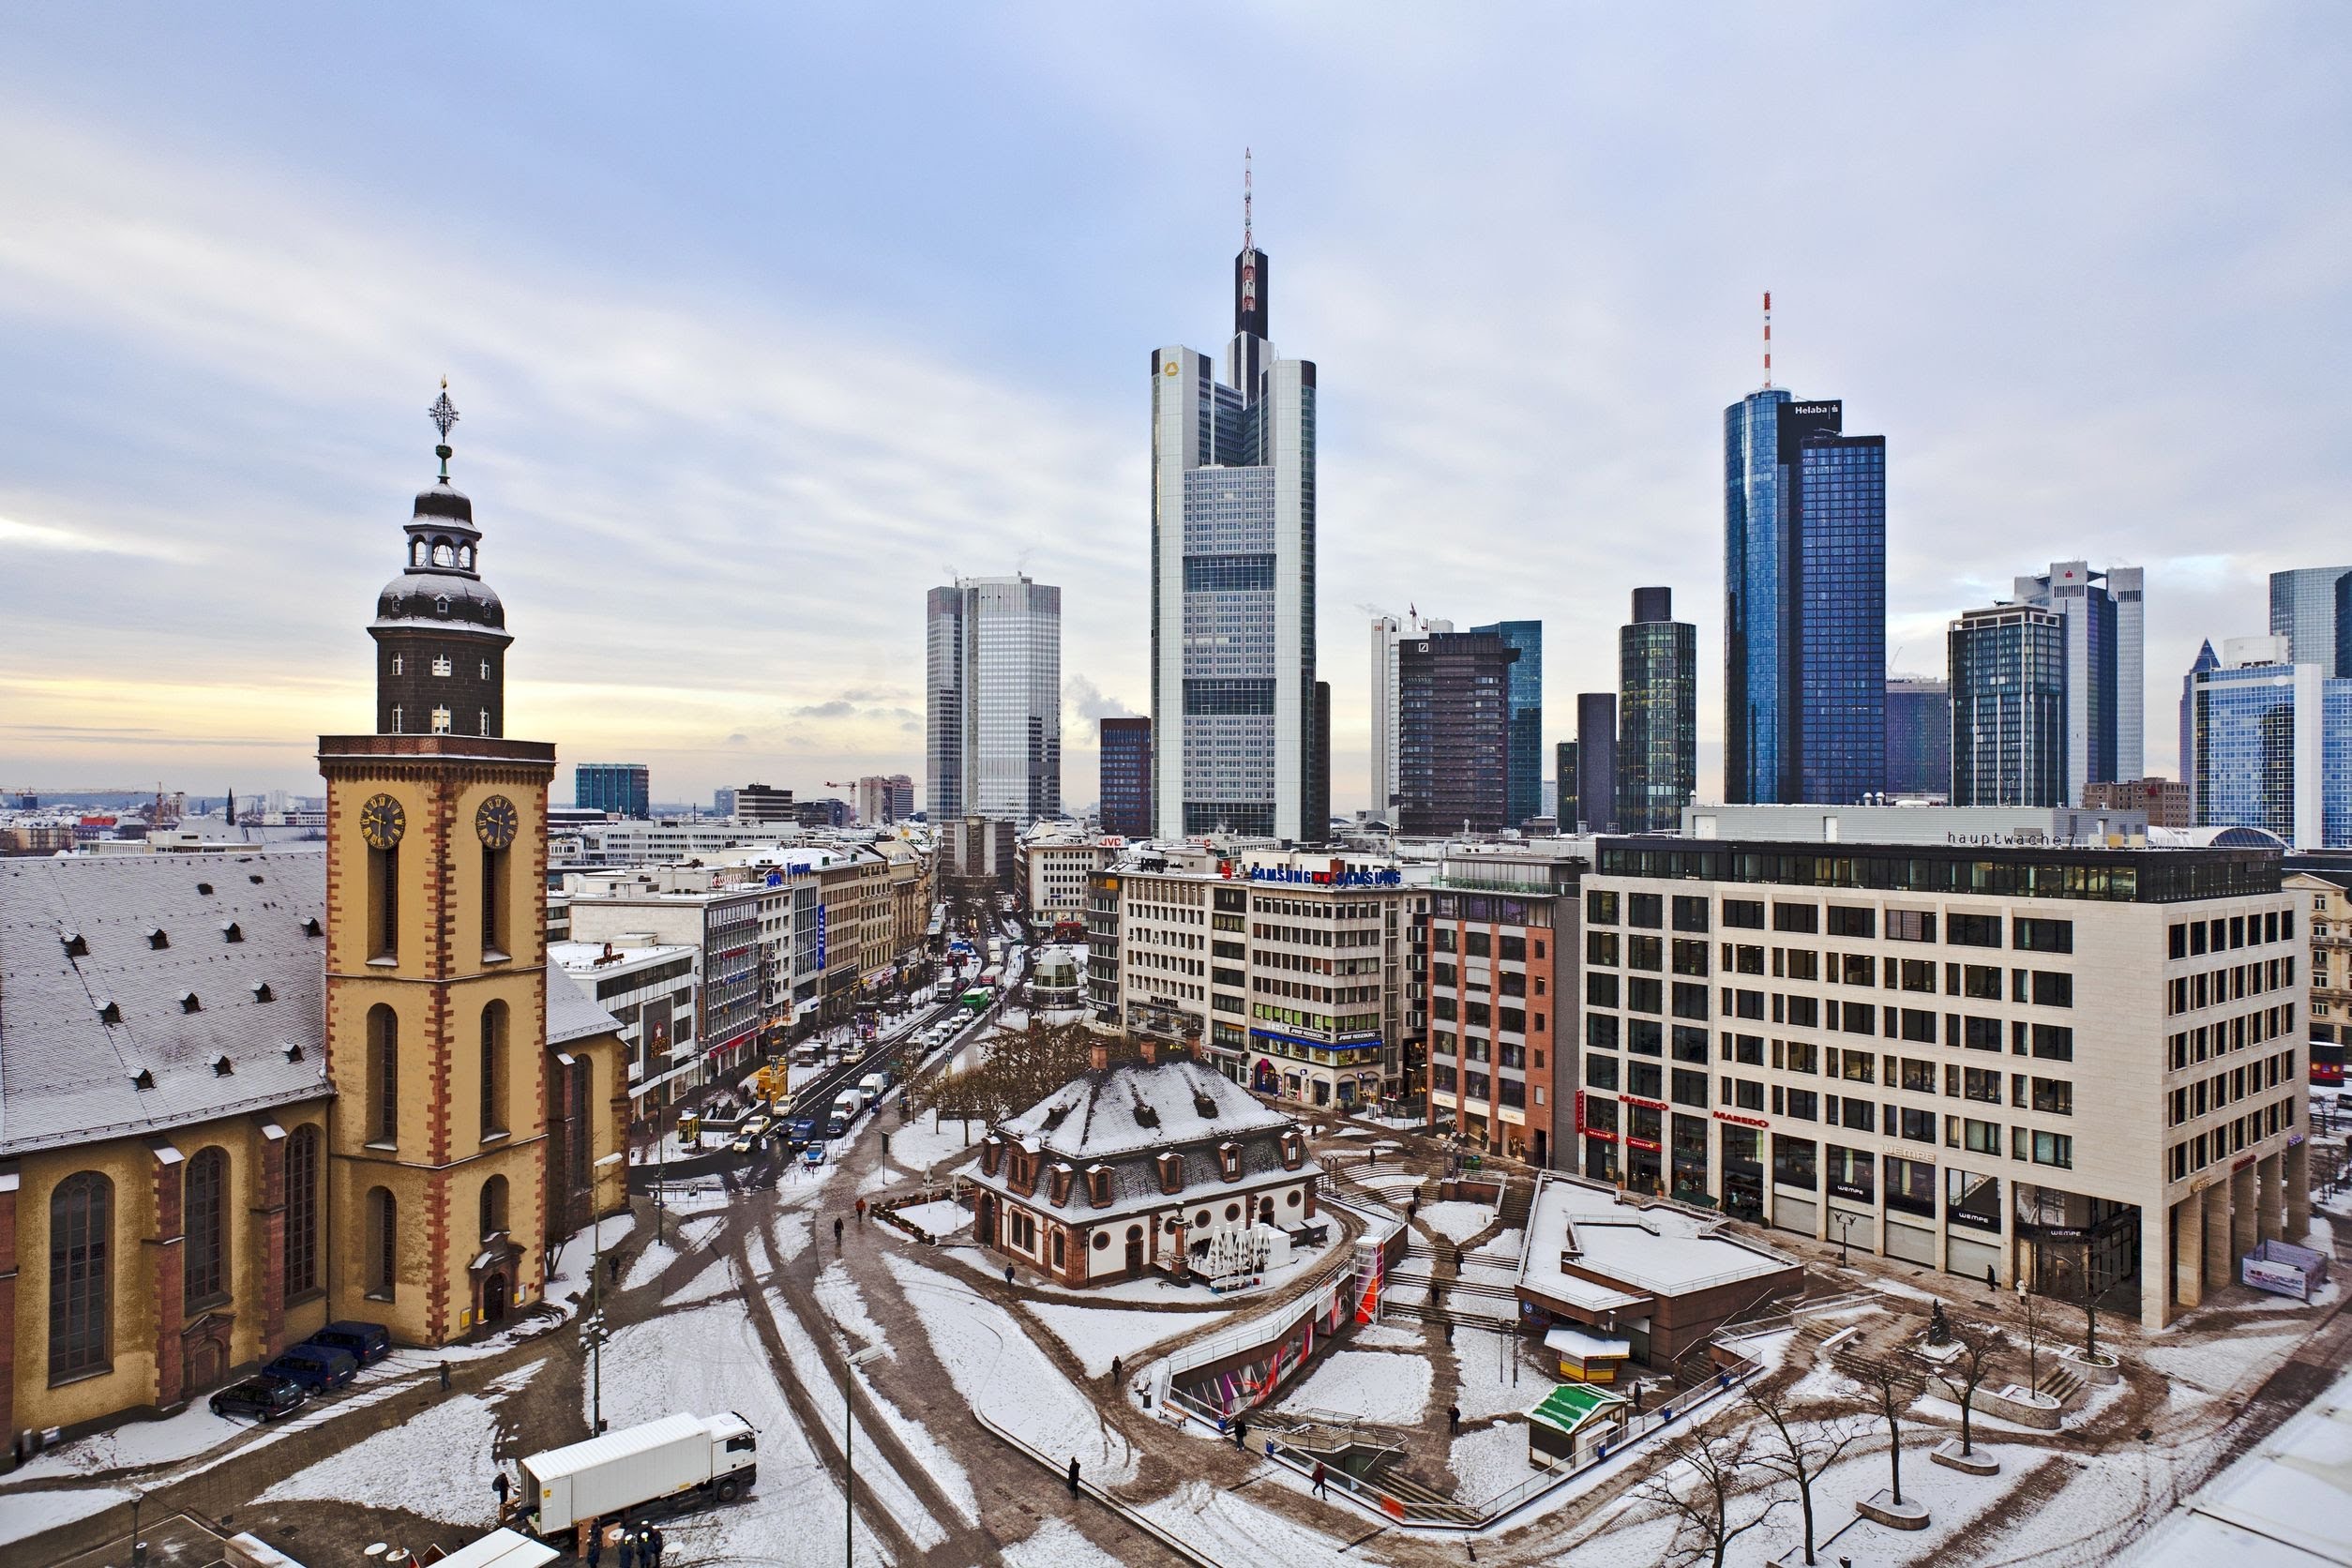 Frankfurt, Germany: Winter In The City-Only Sights & Sounds (1 ...